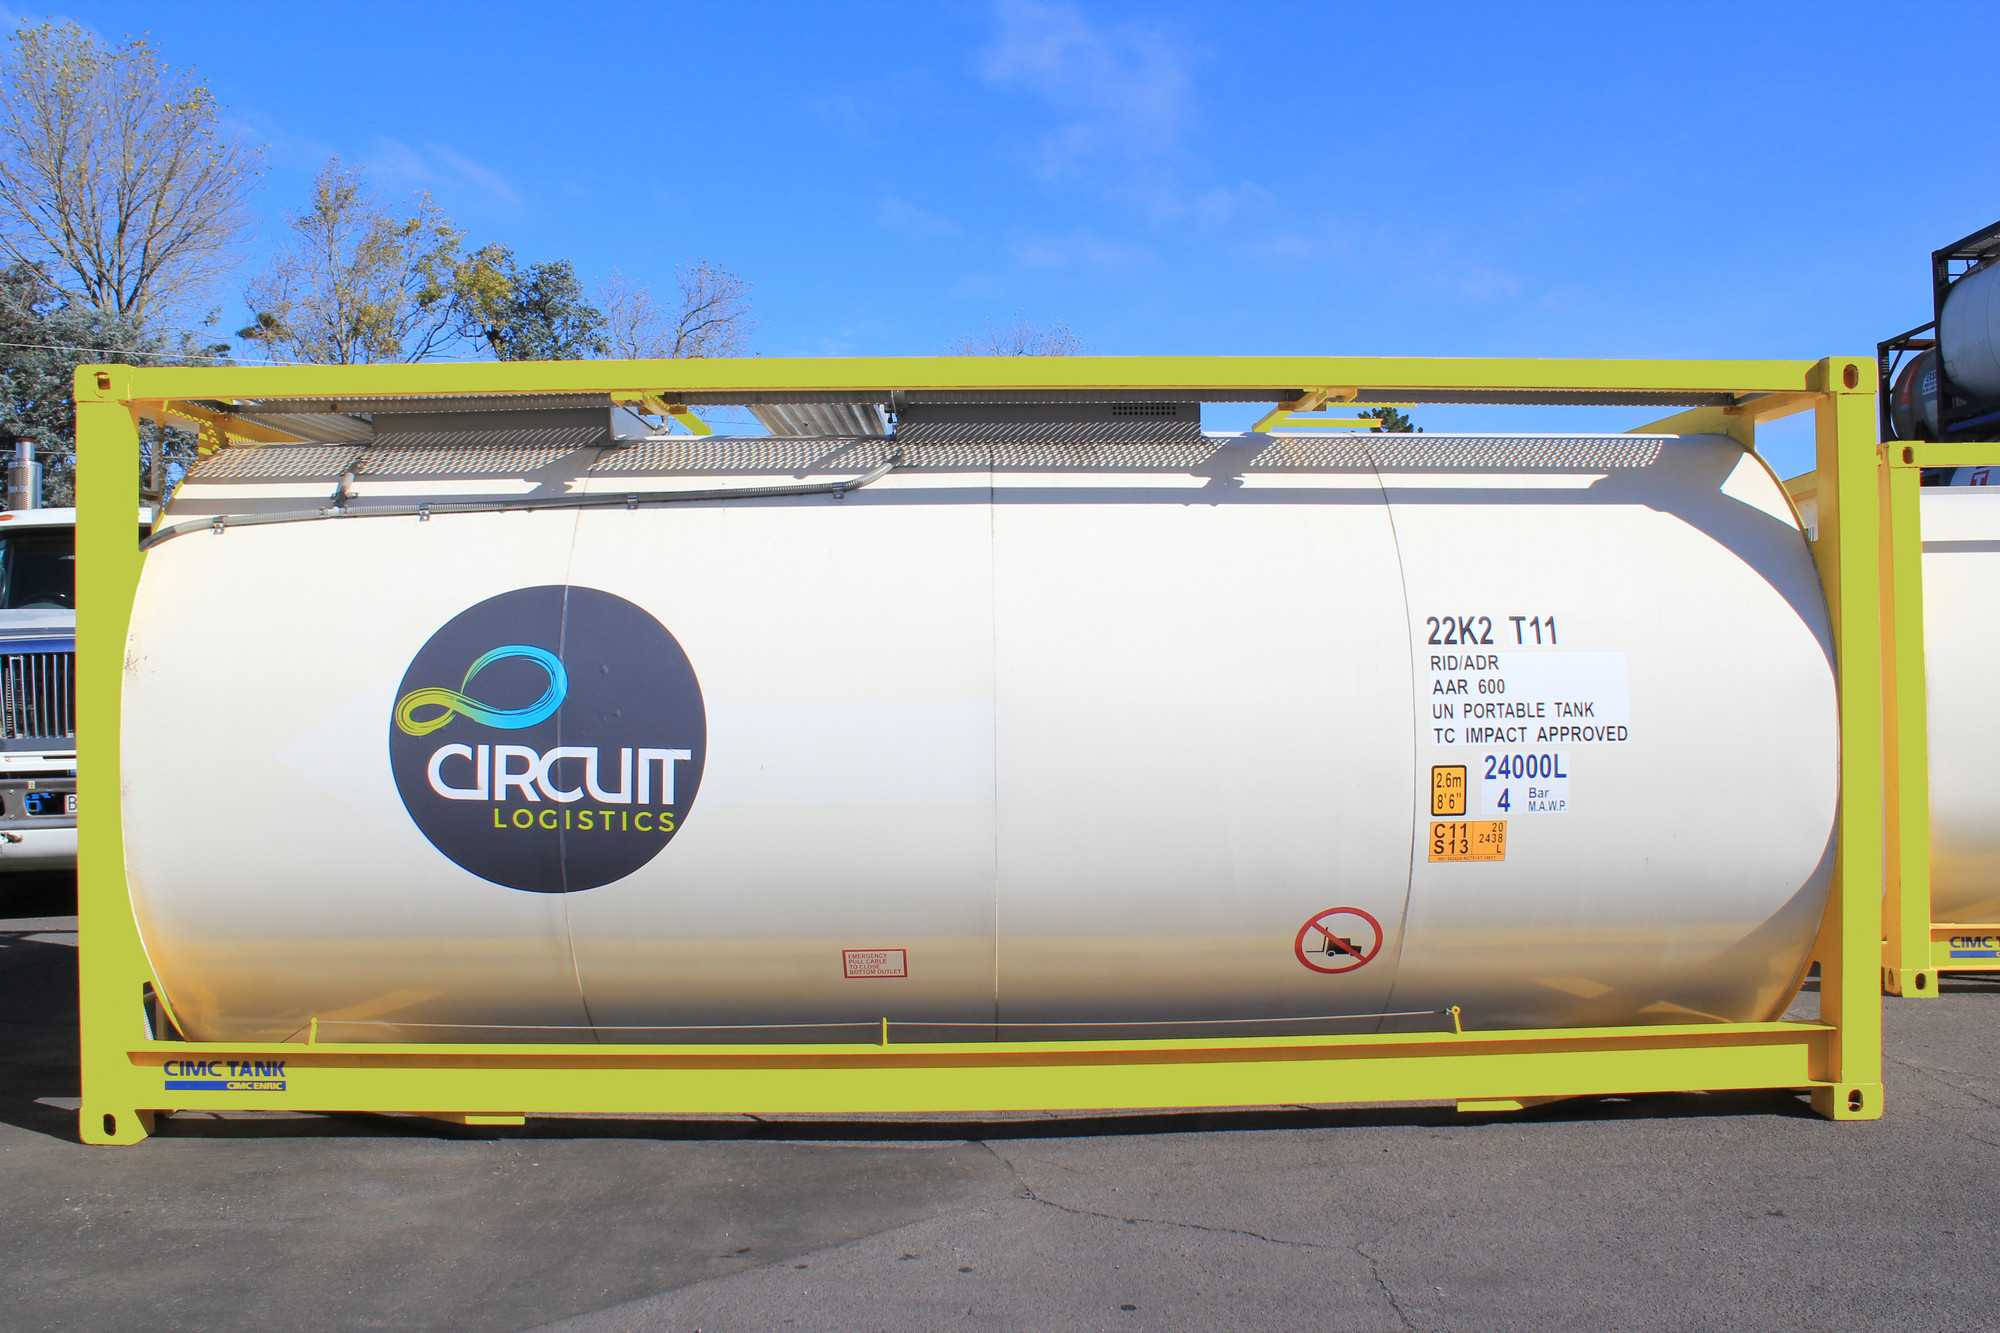 ISO tanks from Circuit Logistics